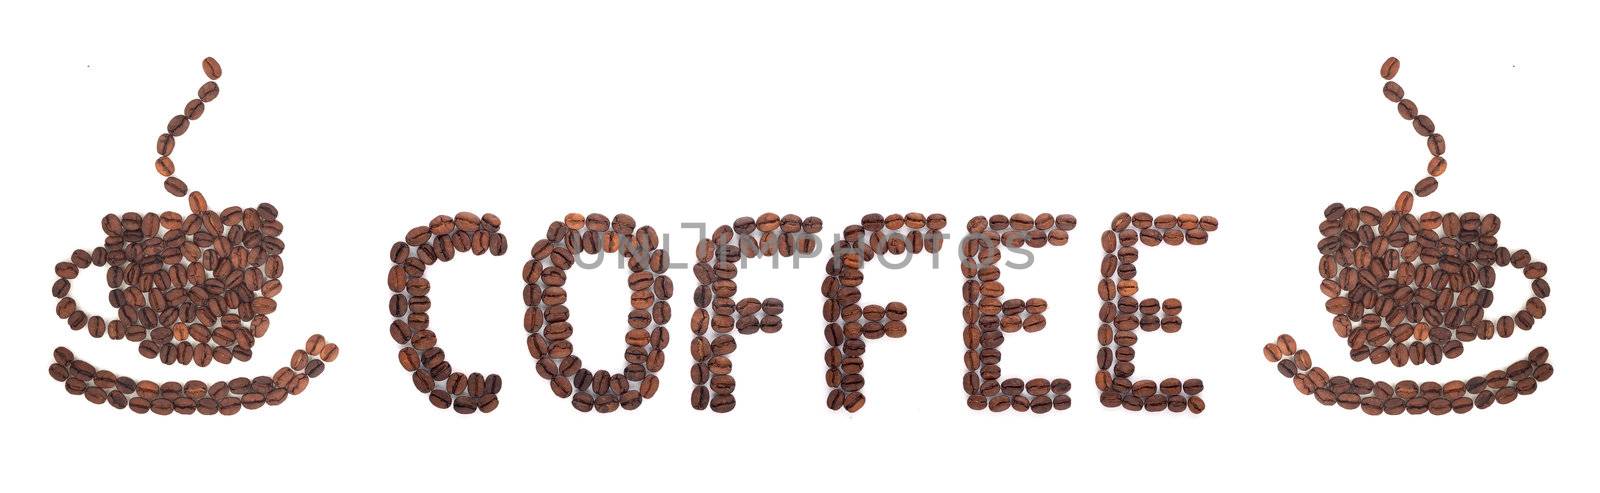 Coffee word made of beans on white background